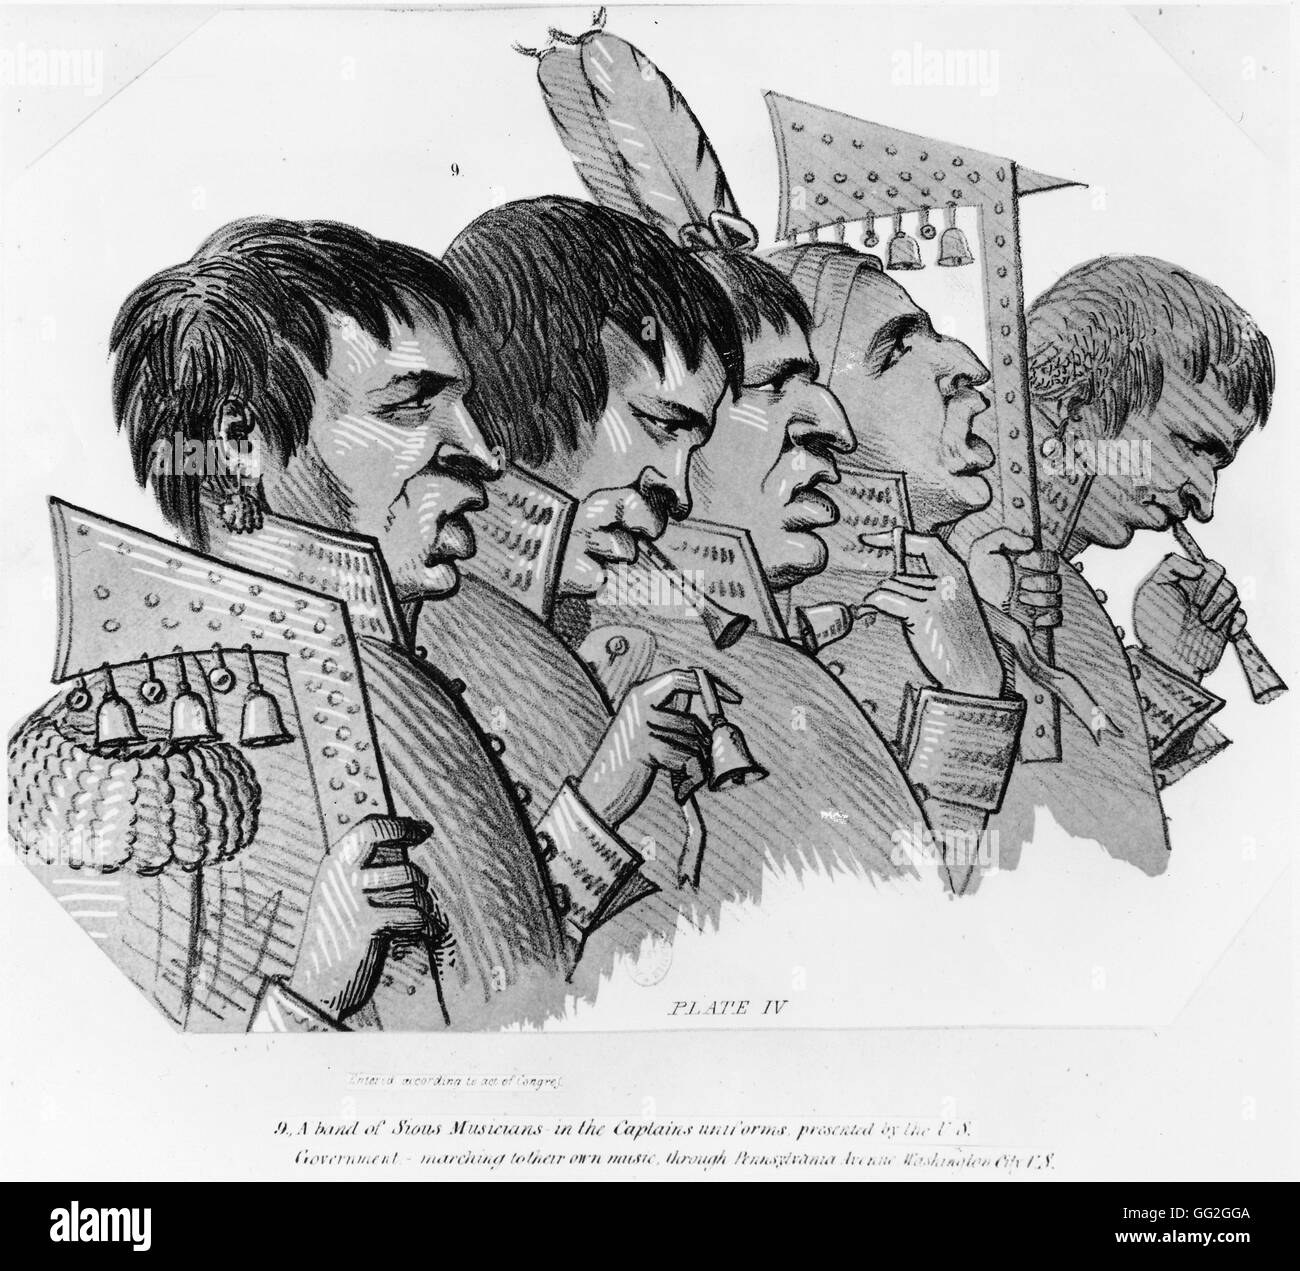 Sioux musicians, in captains' uniforms, playing their music, on Pennsylvania Avenue in Washington DC. Engraving. Beginning of 20th century Paris, Bibliothèque Nationale de France Stock Photo